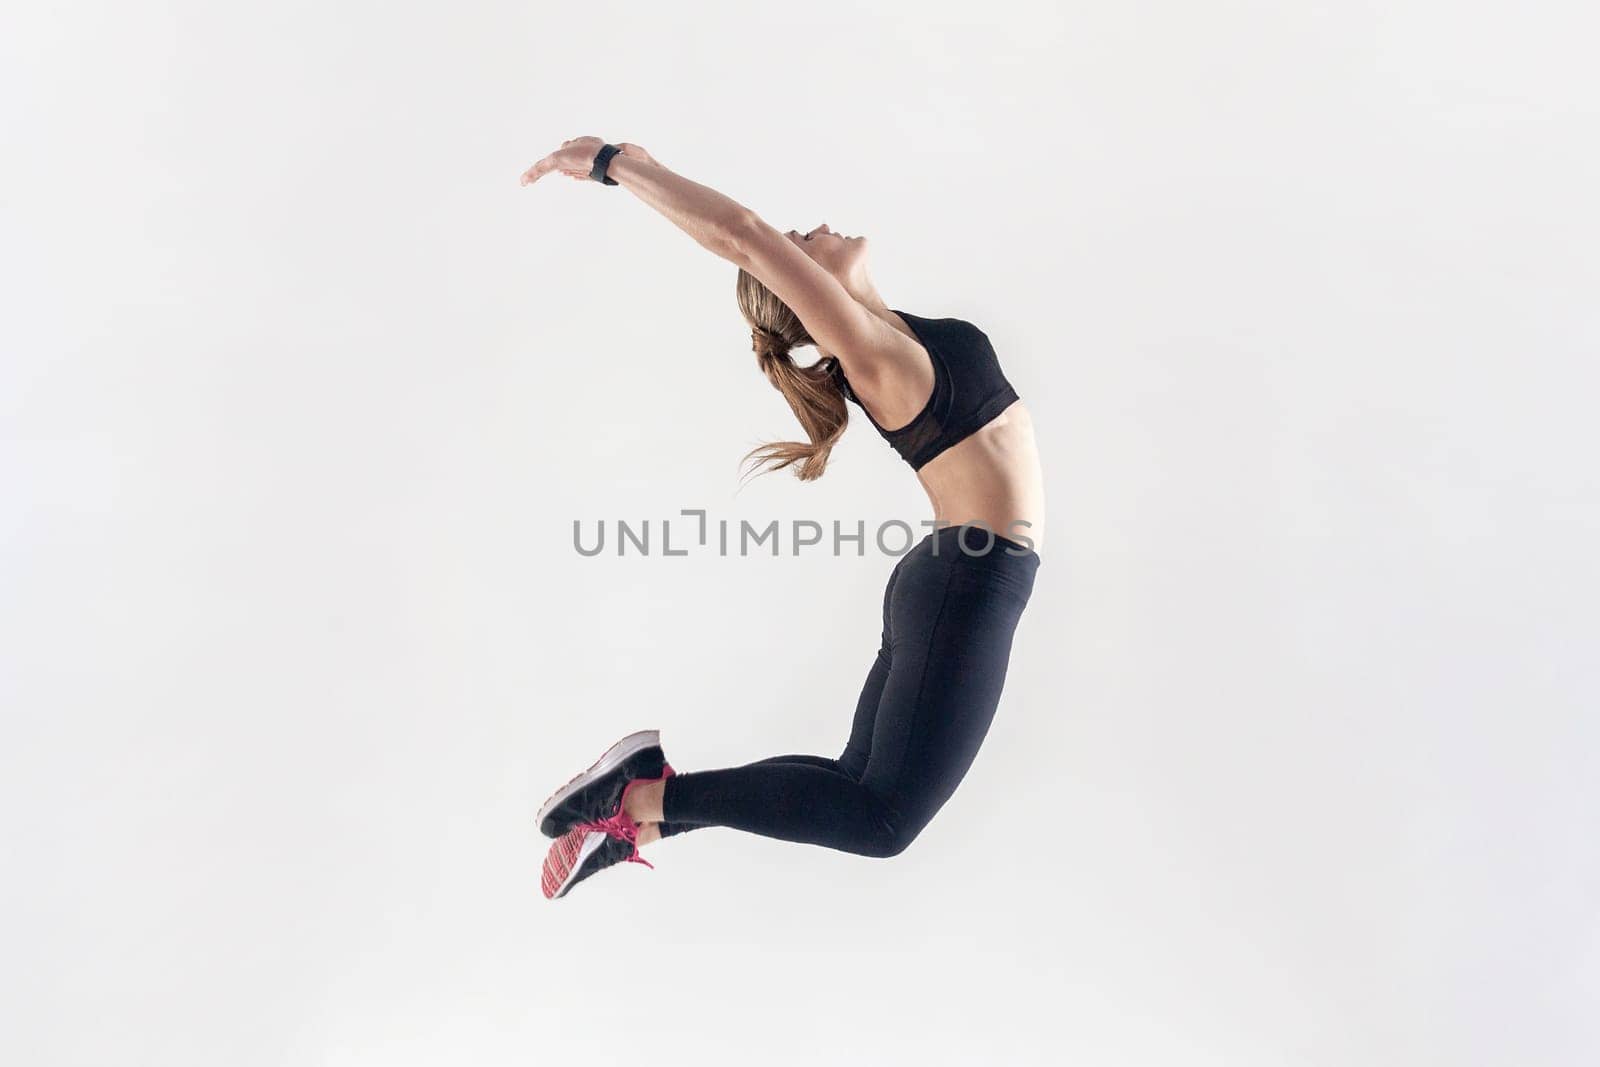 Side view portrait of athletic blonde woman with perfect body jumping high and keeping hands up, hands up, wearing black fitness clothing. Indoor studio shot isolated on gray background.